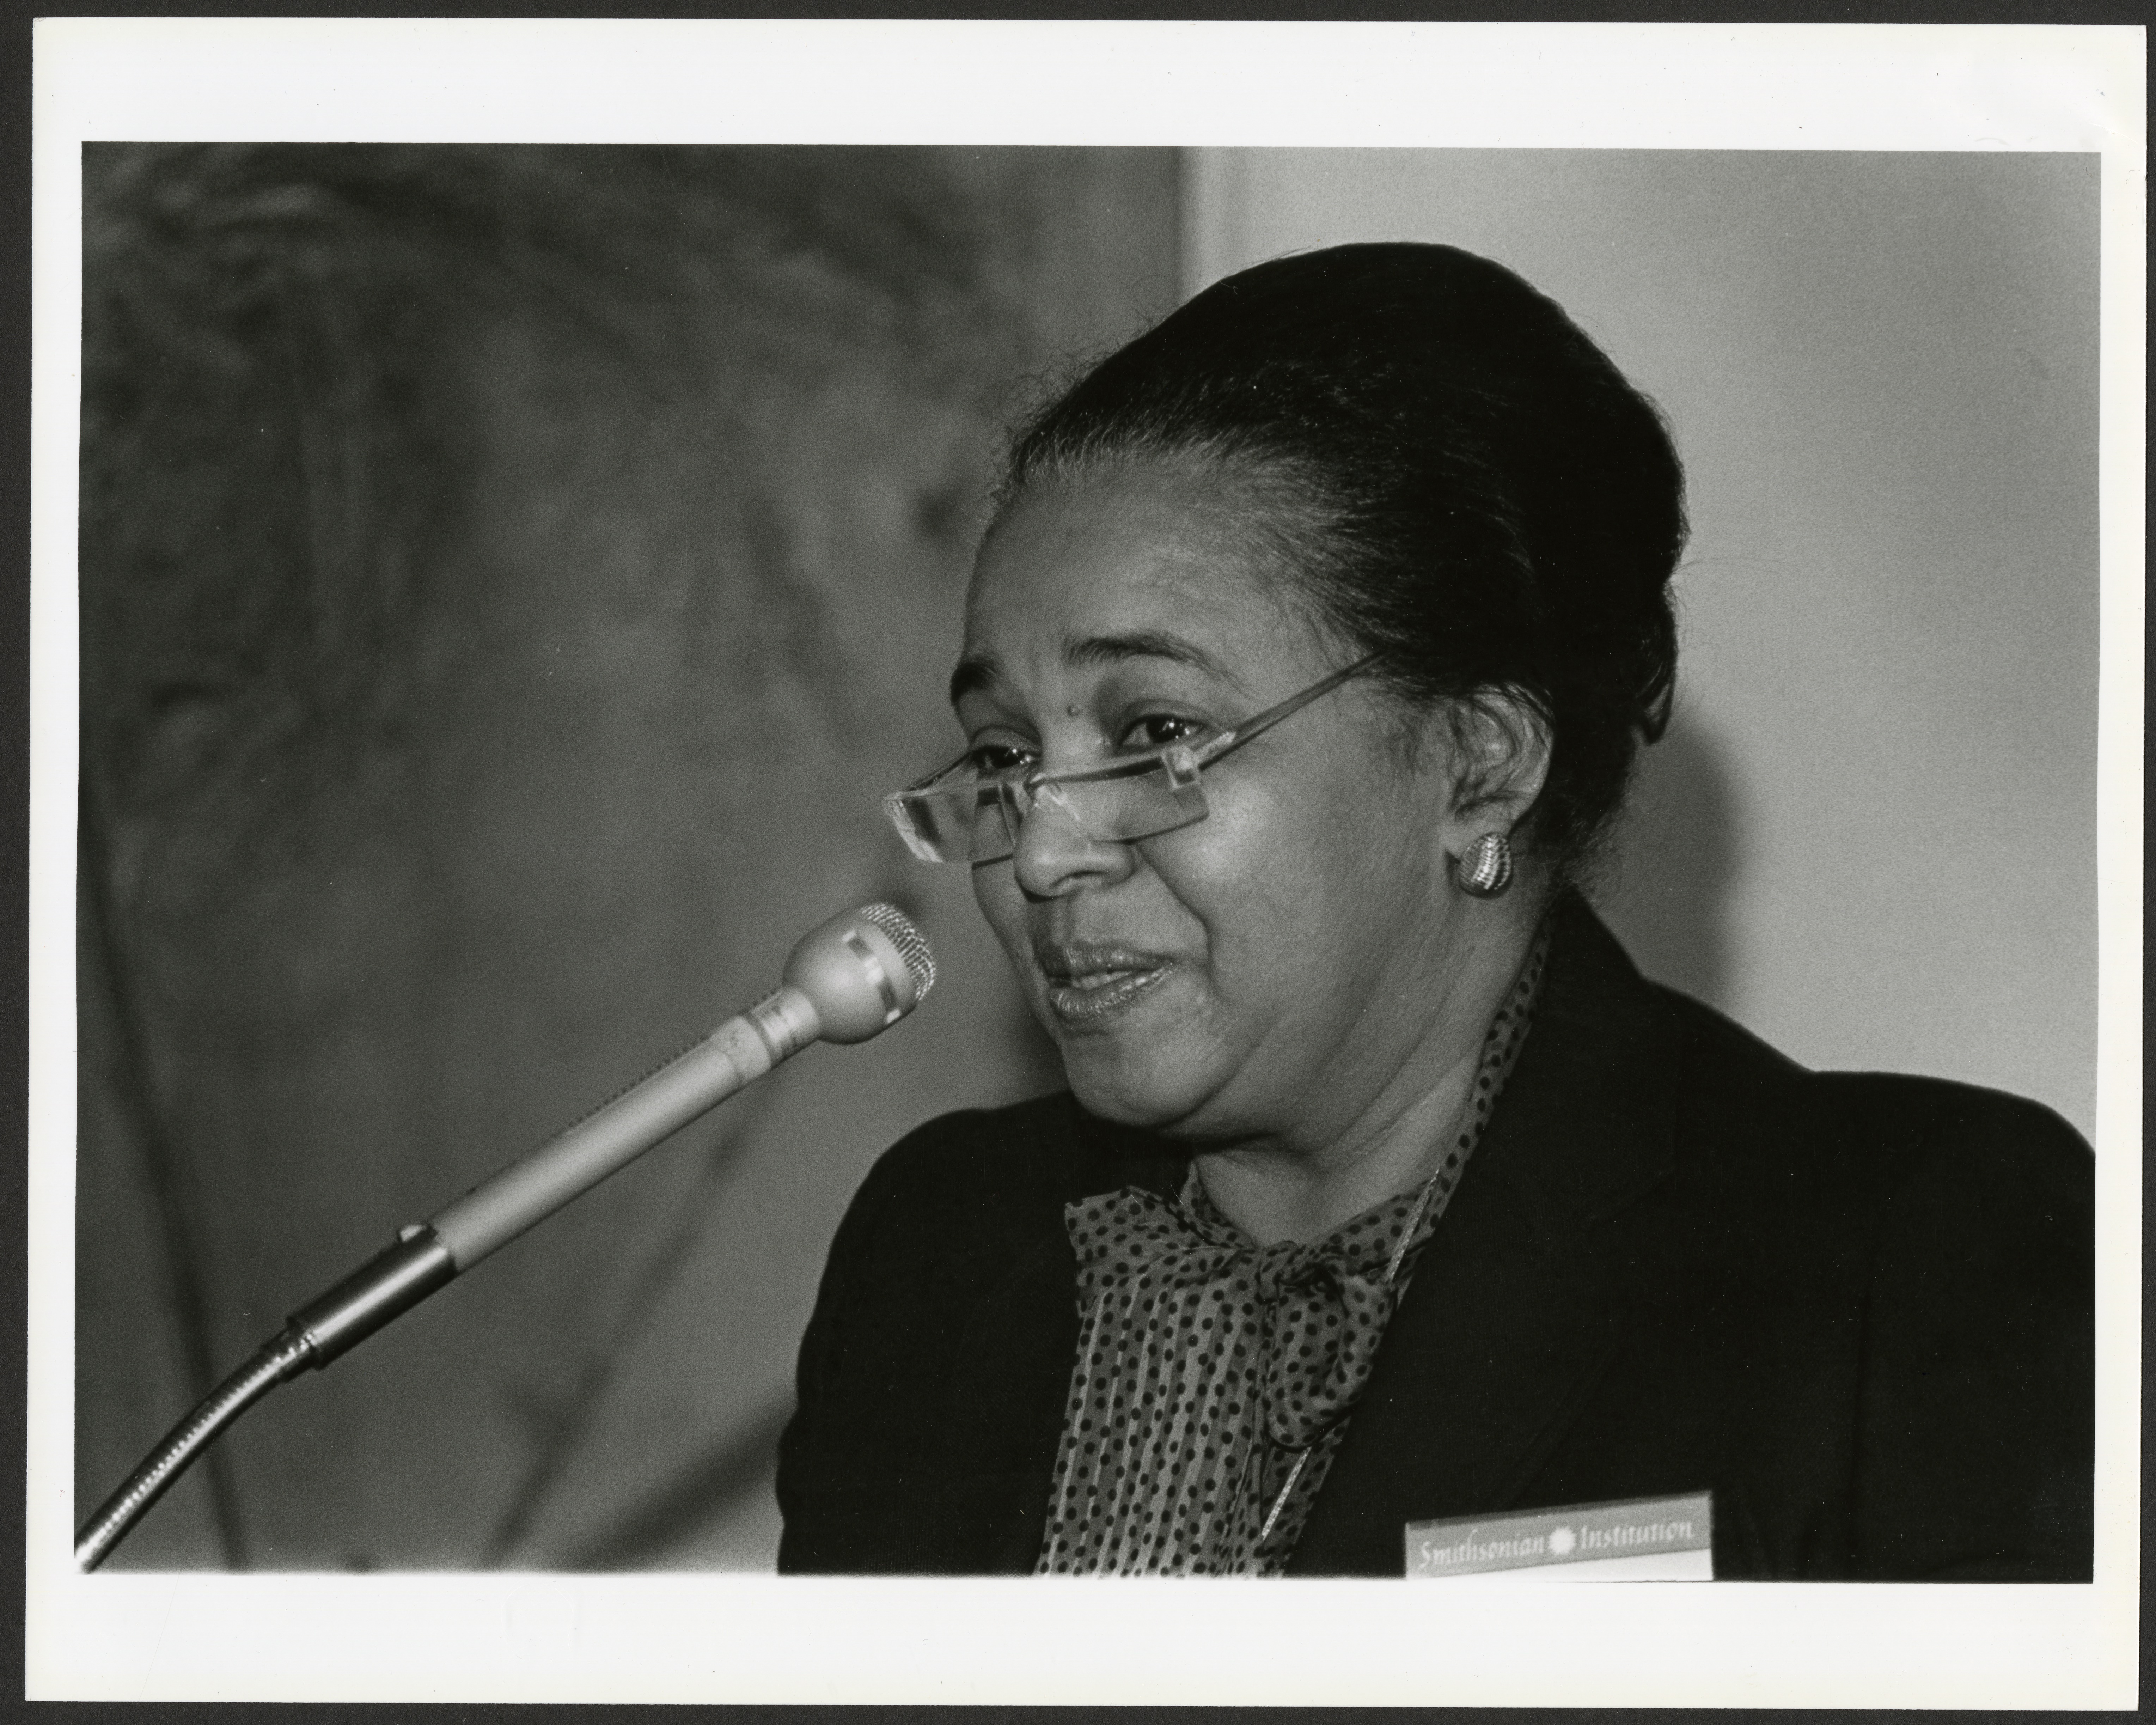 Black and white photograph of woman speaking at microphone.